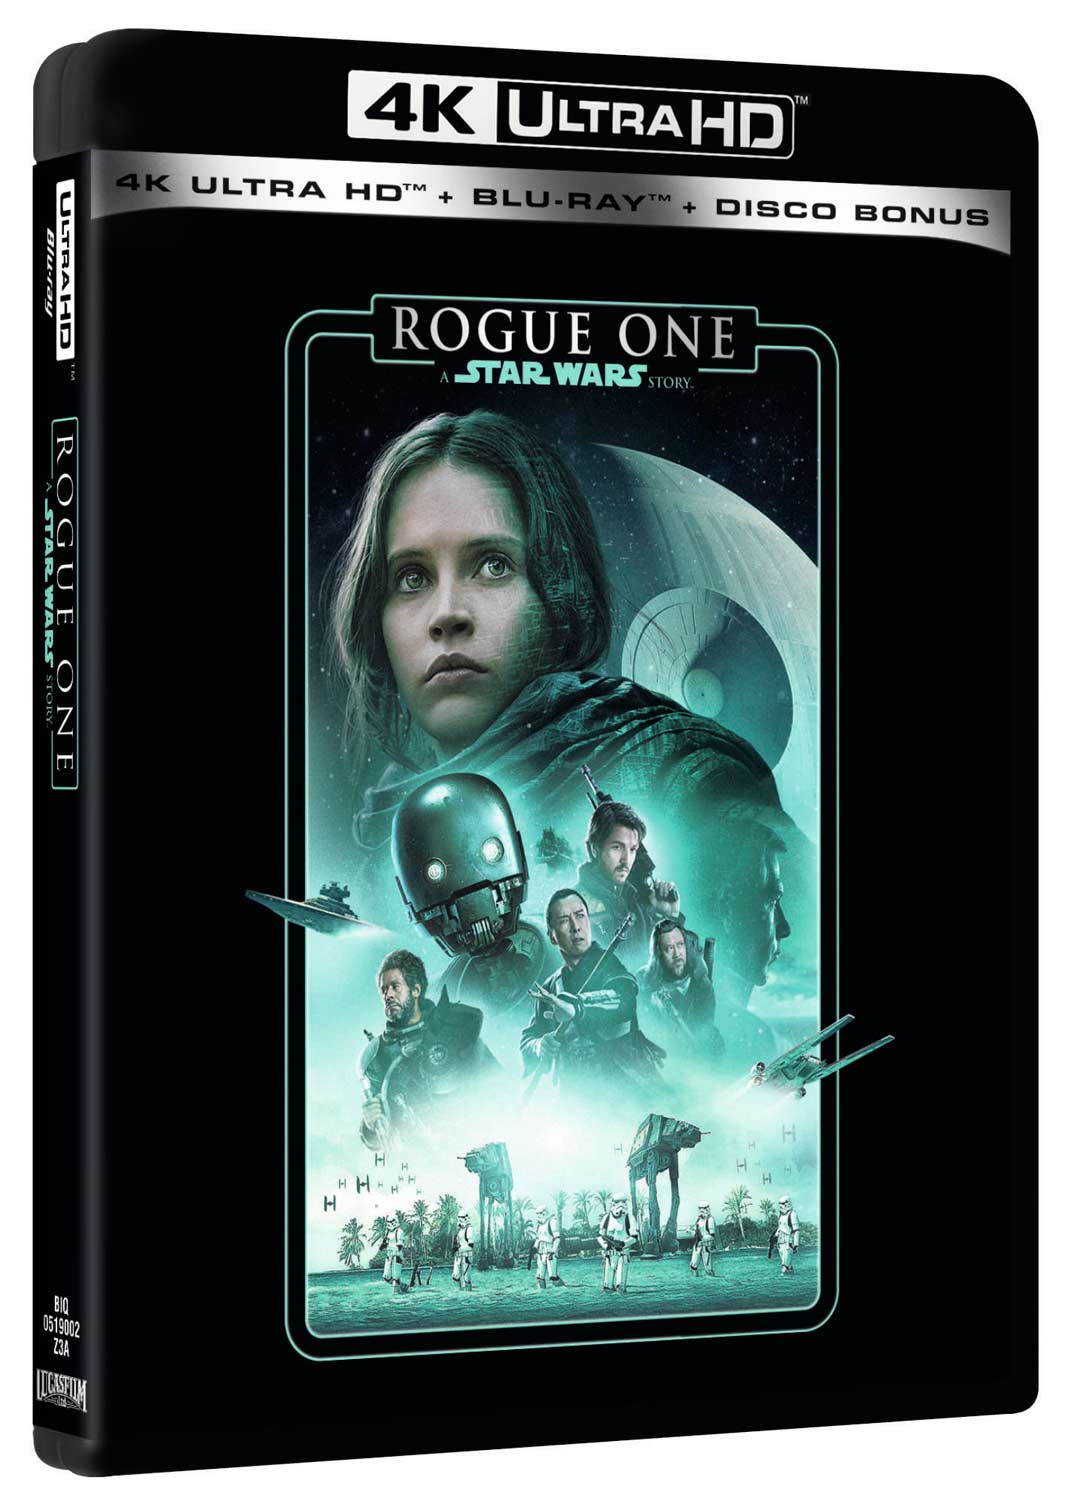 ROGUE ONE - A STAR WARS STORY REPKG UHD